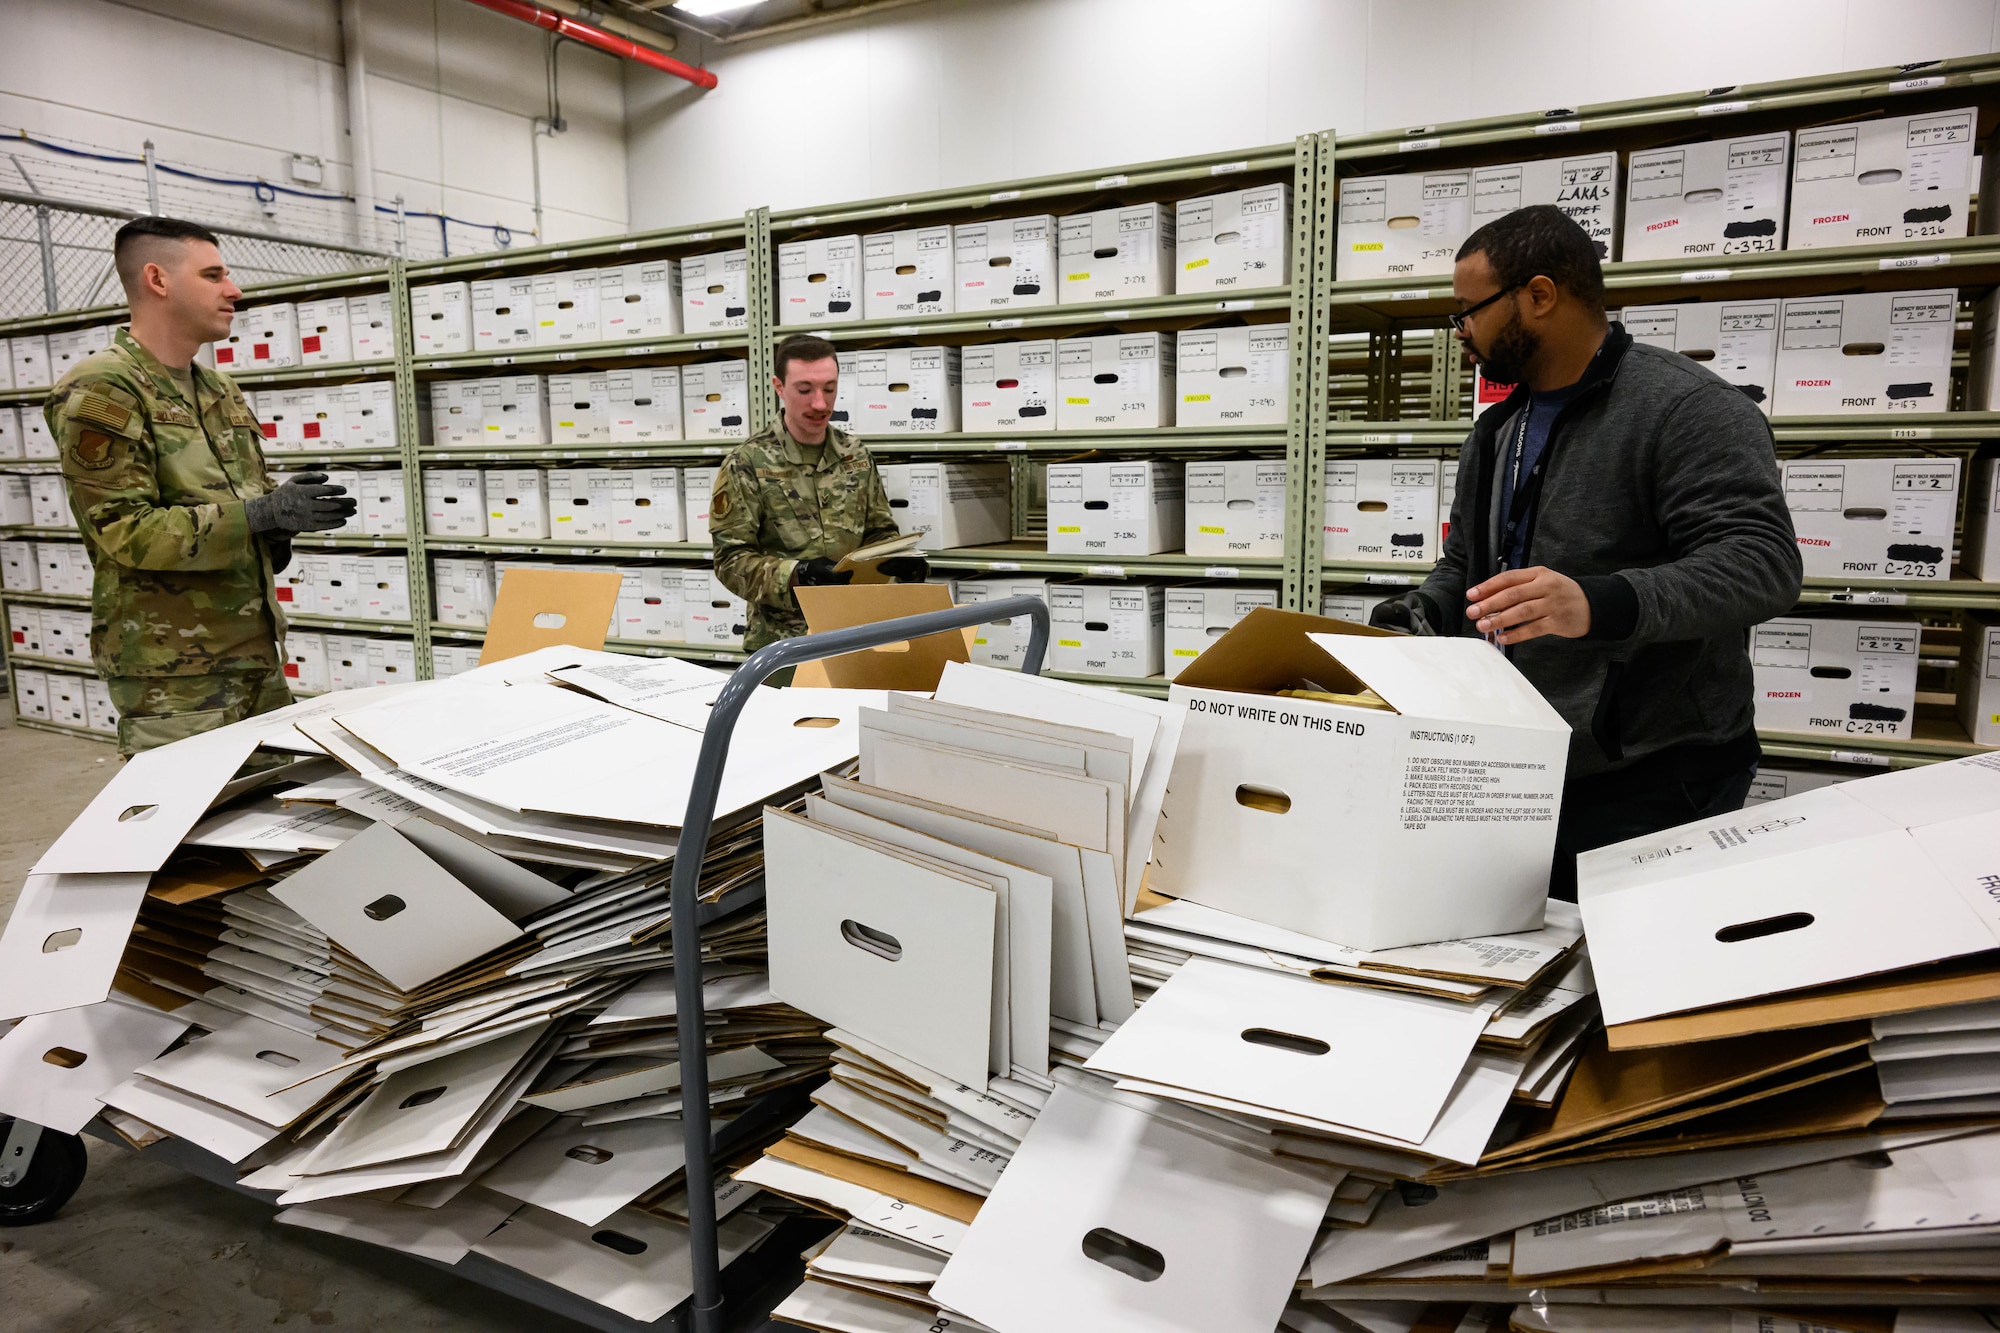 Left to right, Staff Sgt. Jared Sylvester, Senior Airman Brandon Tankersley and Bryce Terry, 75th Communications and Information Directorate, process boxed records at the Records Staging Facility at Hill Air Force Base, Utah, Dec. 22, 2022.  The Office of Management and Budget directed the Air Force to close all agency operated paper storage facilities and transfer permanent and long-retention records to Federal Records Centers operated by the National Archives and Records Administration by Dec. 31, 2022. The staging facility at Hill provided supported to more than 100 organizations. (U.S. Air Force photo by R. Nial Bradshaw)